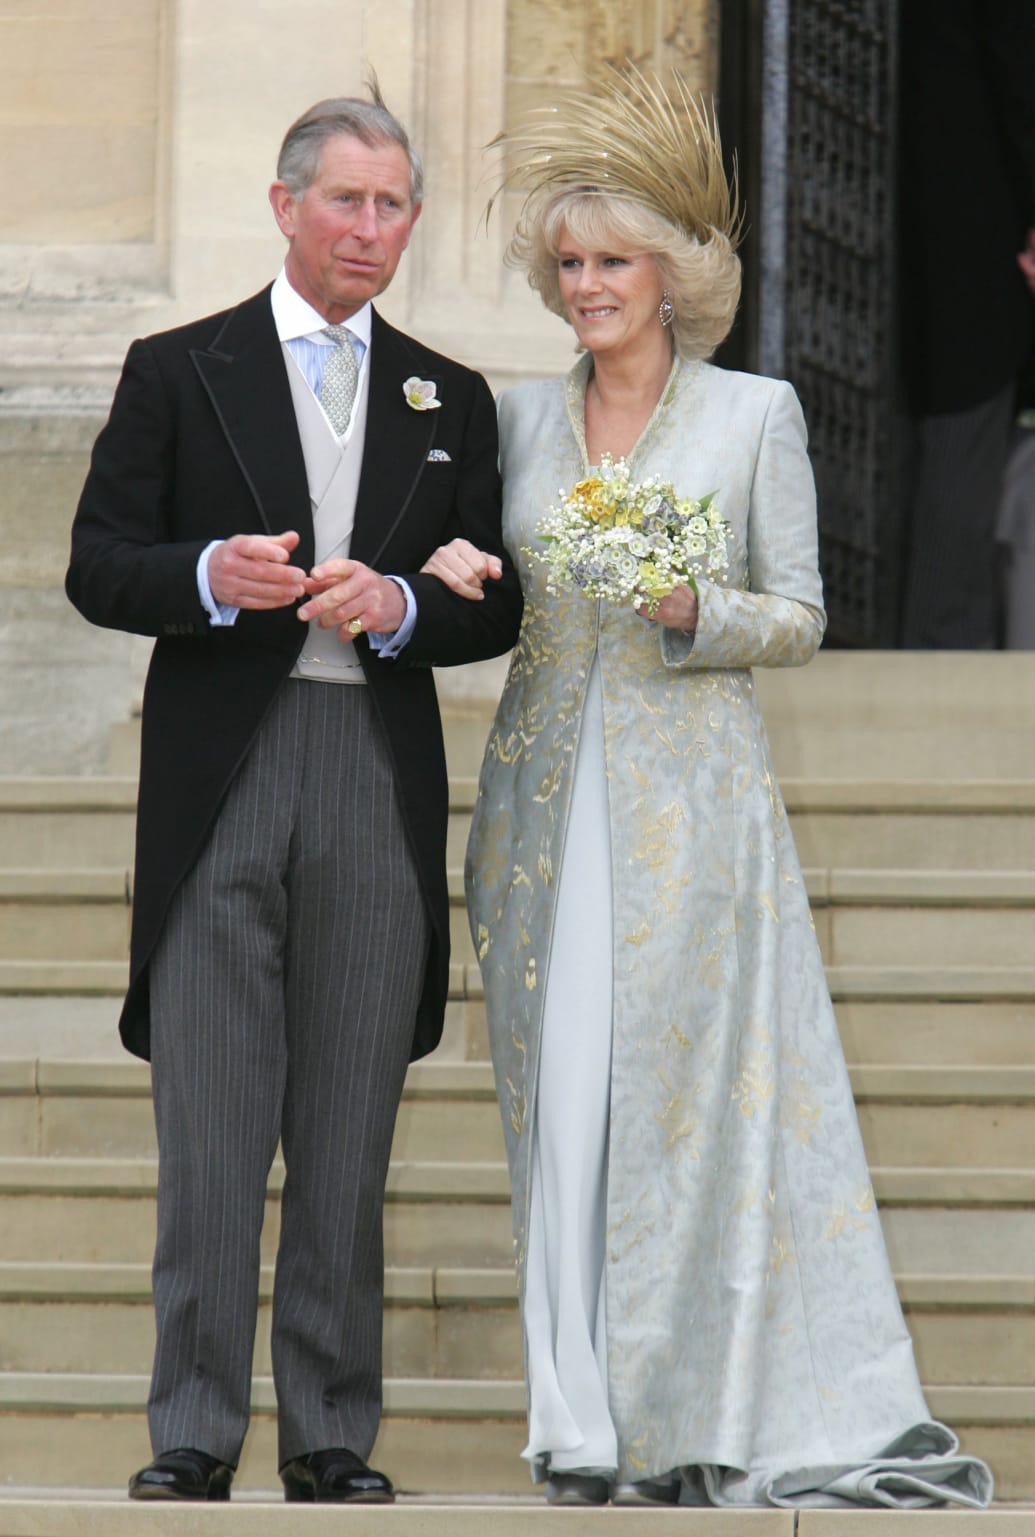 Then-Prince Charles and Camilla, Duchess of Cornwall, pose outside St. George's Chapel in Windsor Castle, after the Service of Prayer and Dedication following their marriage, April 9, 2005.